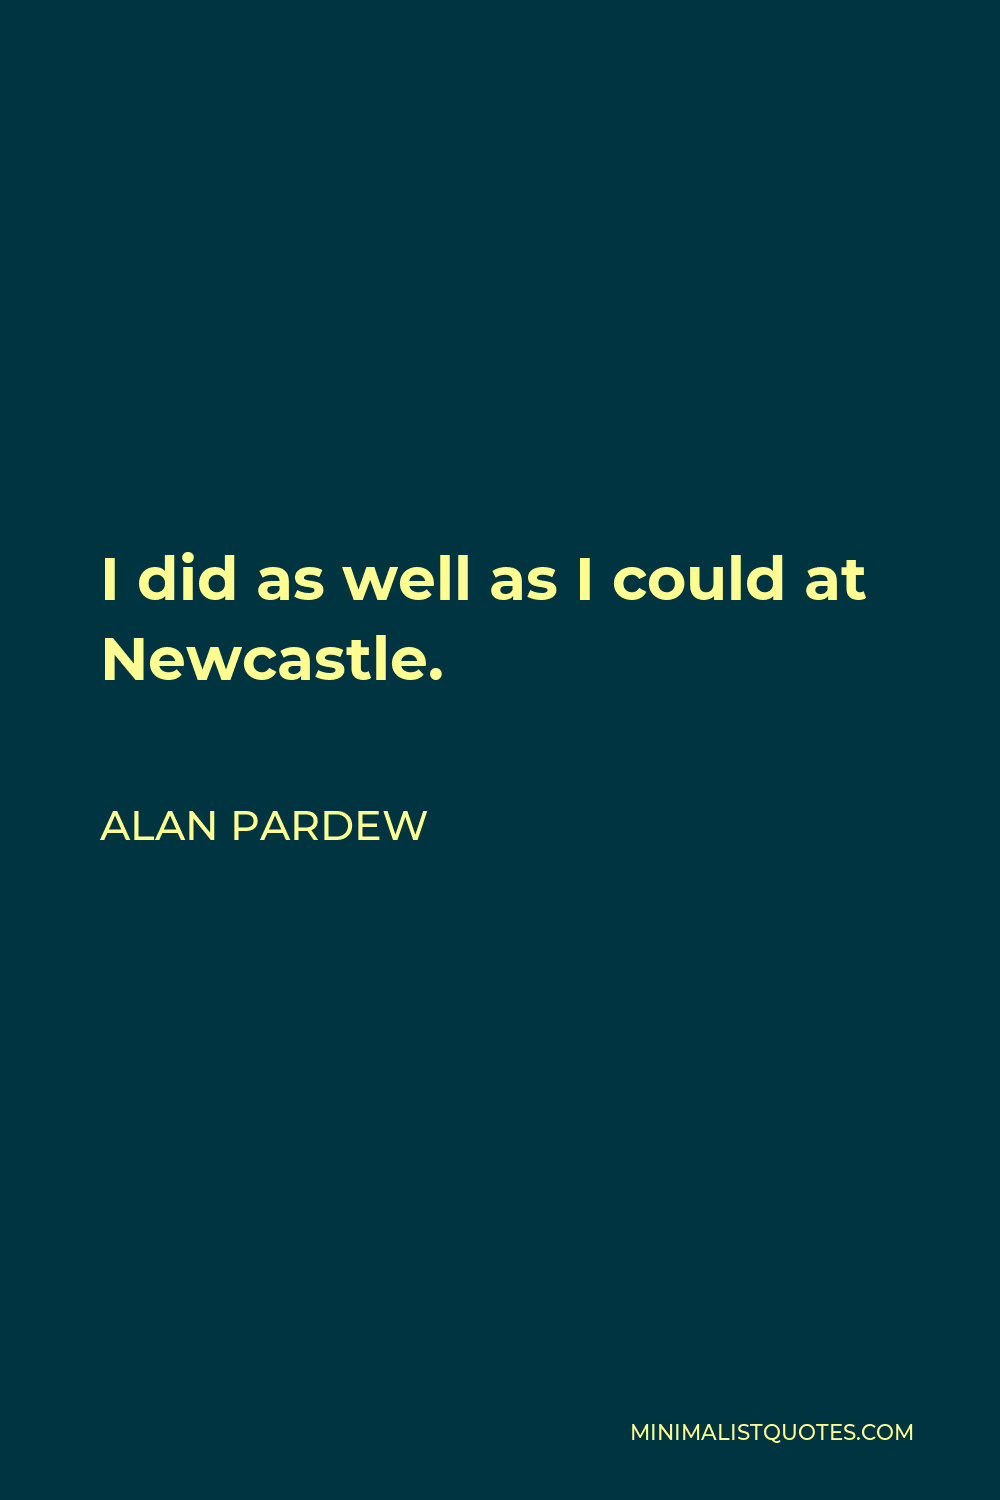 Alan Pardew Quote - I did as well as I could at Newcastle.